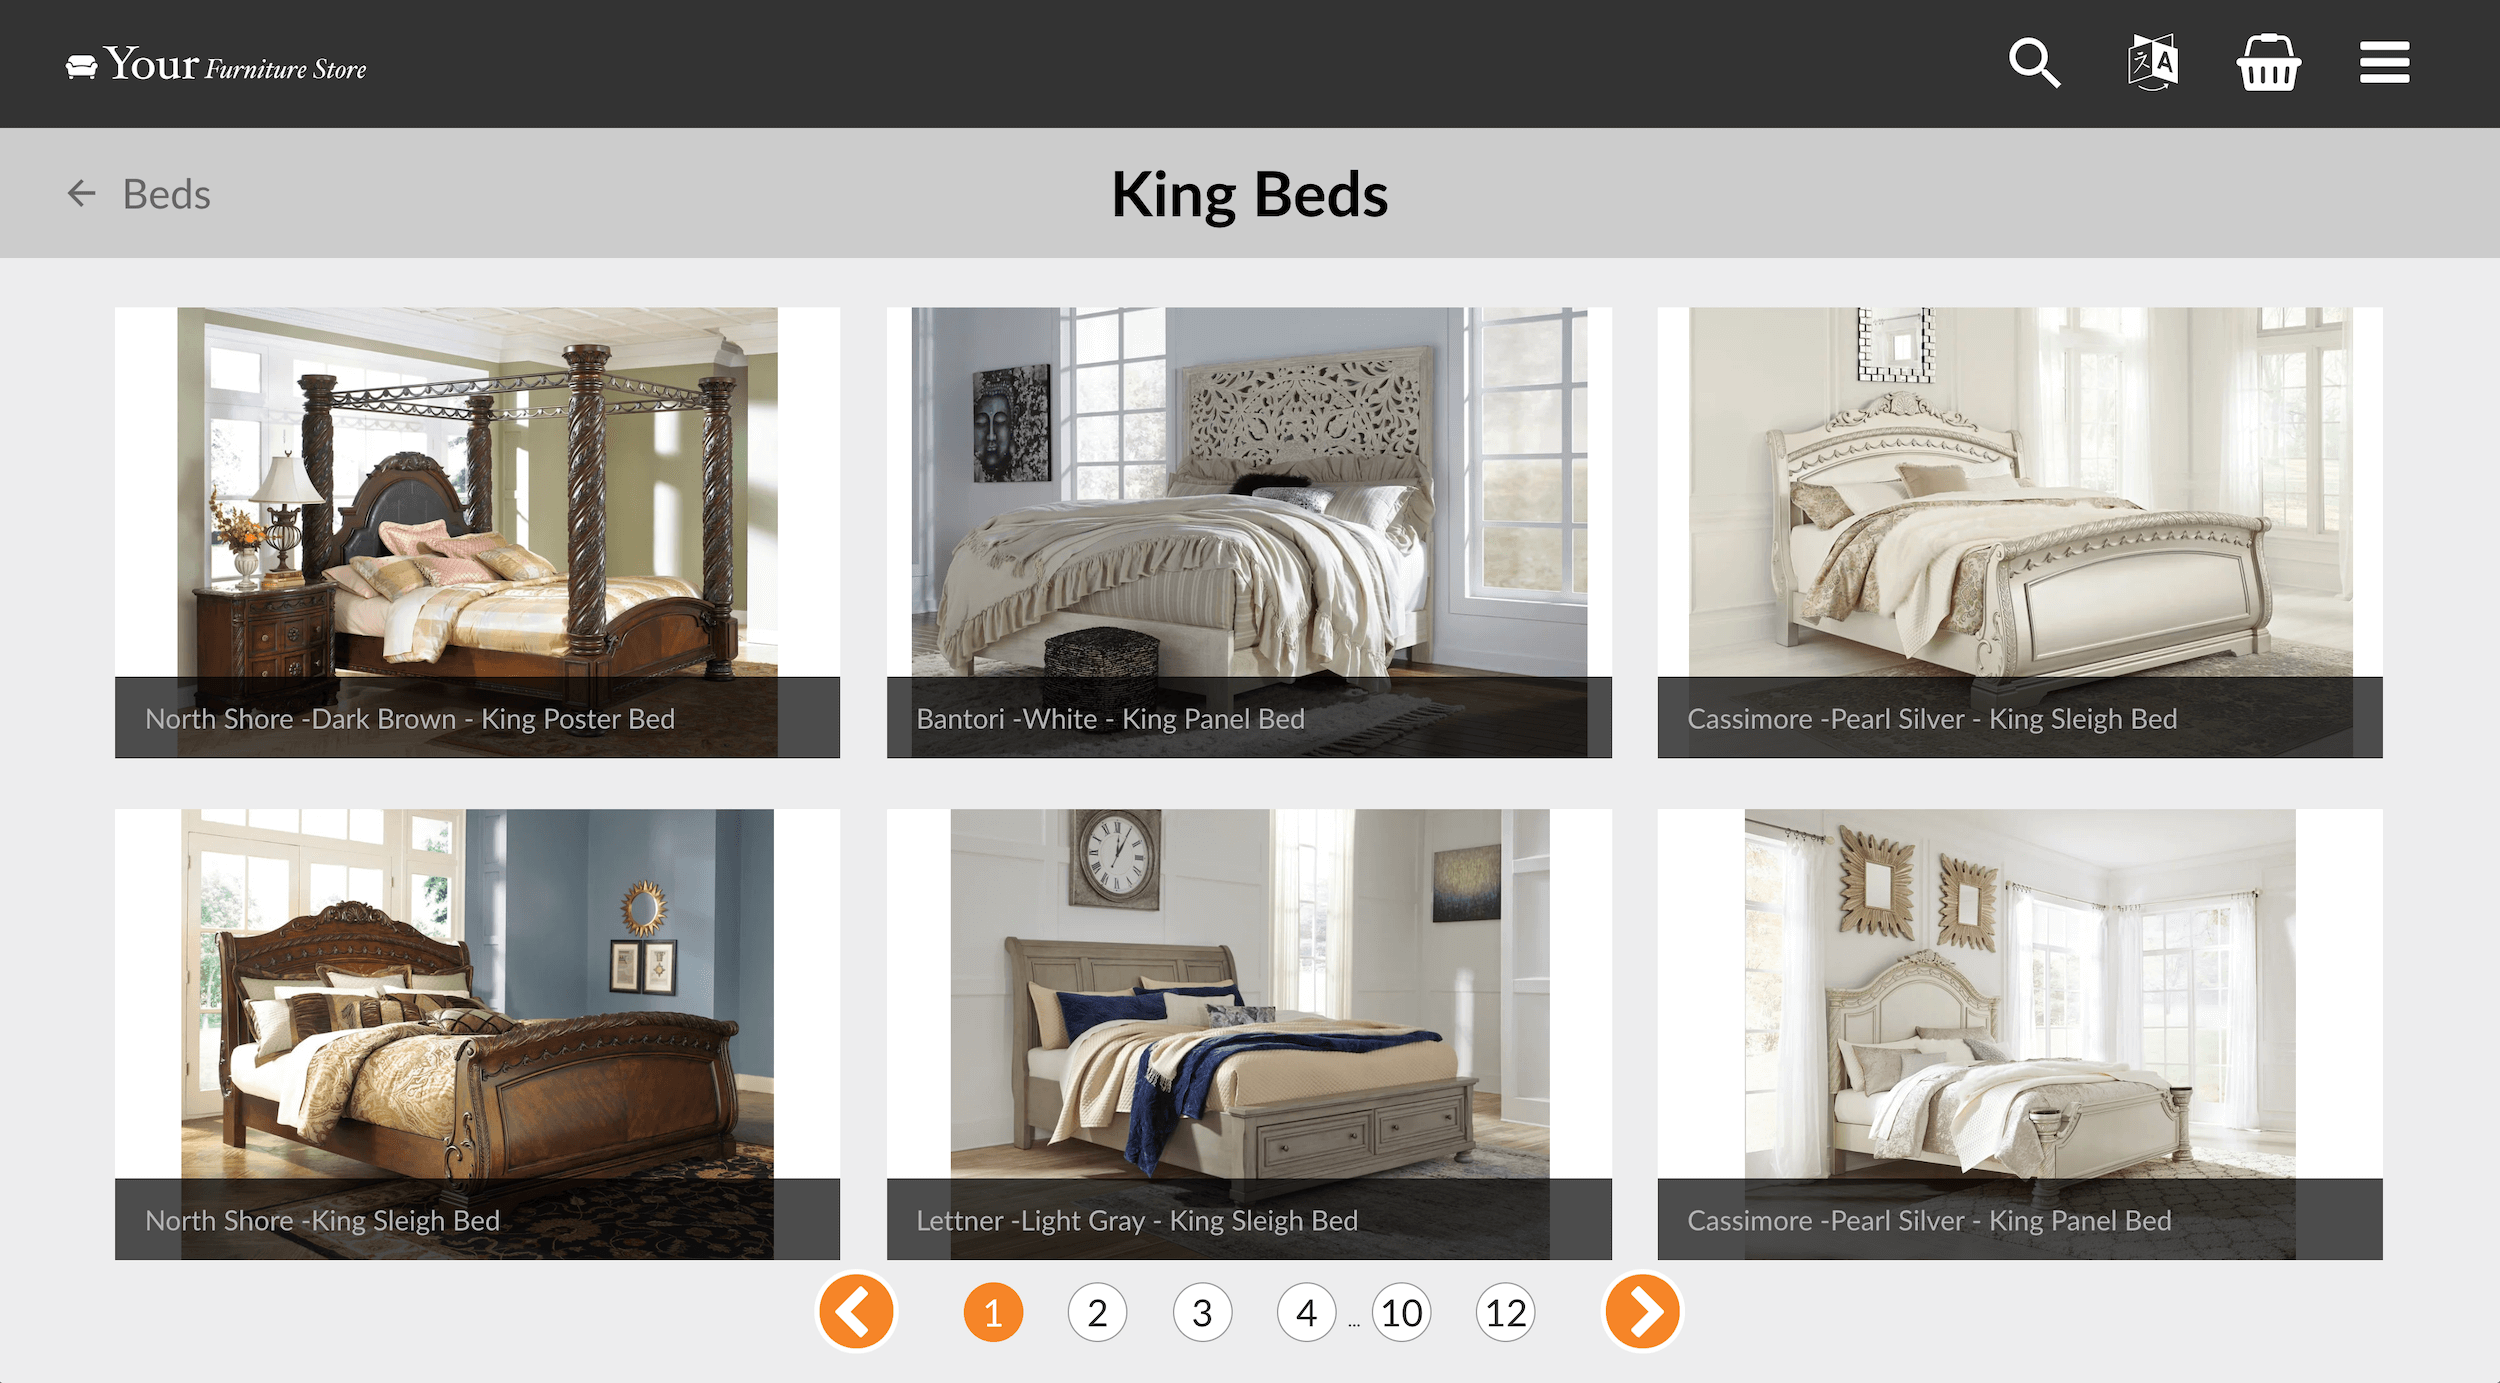 King Beds Grid View copy.png